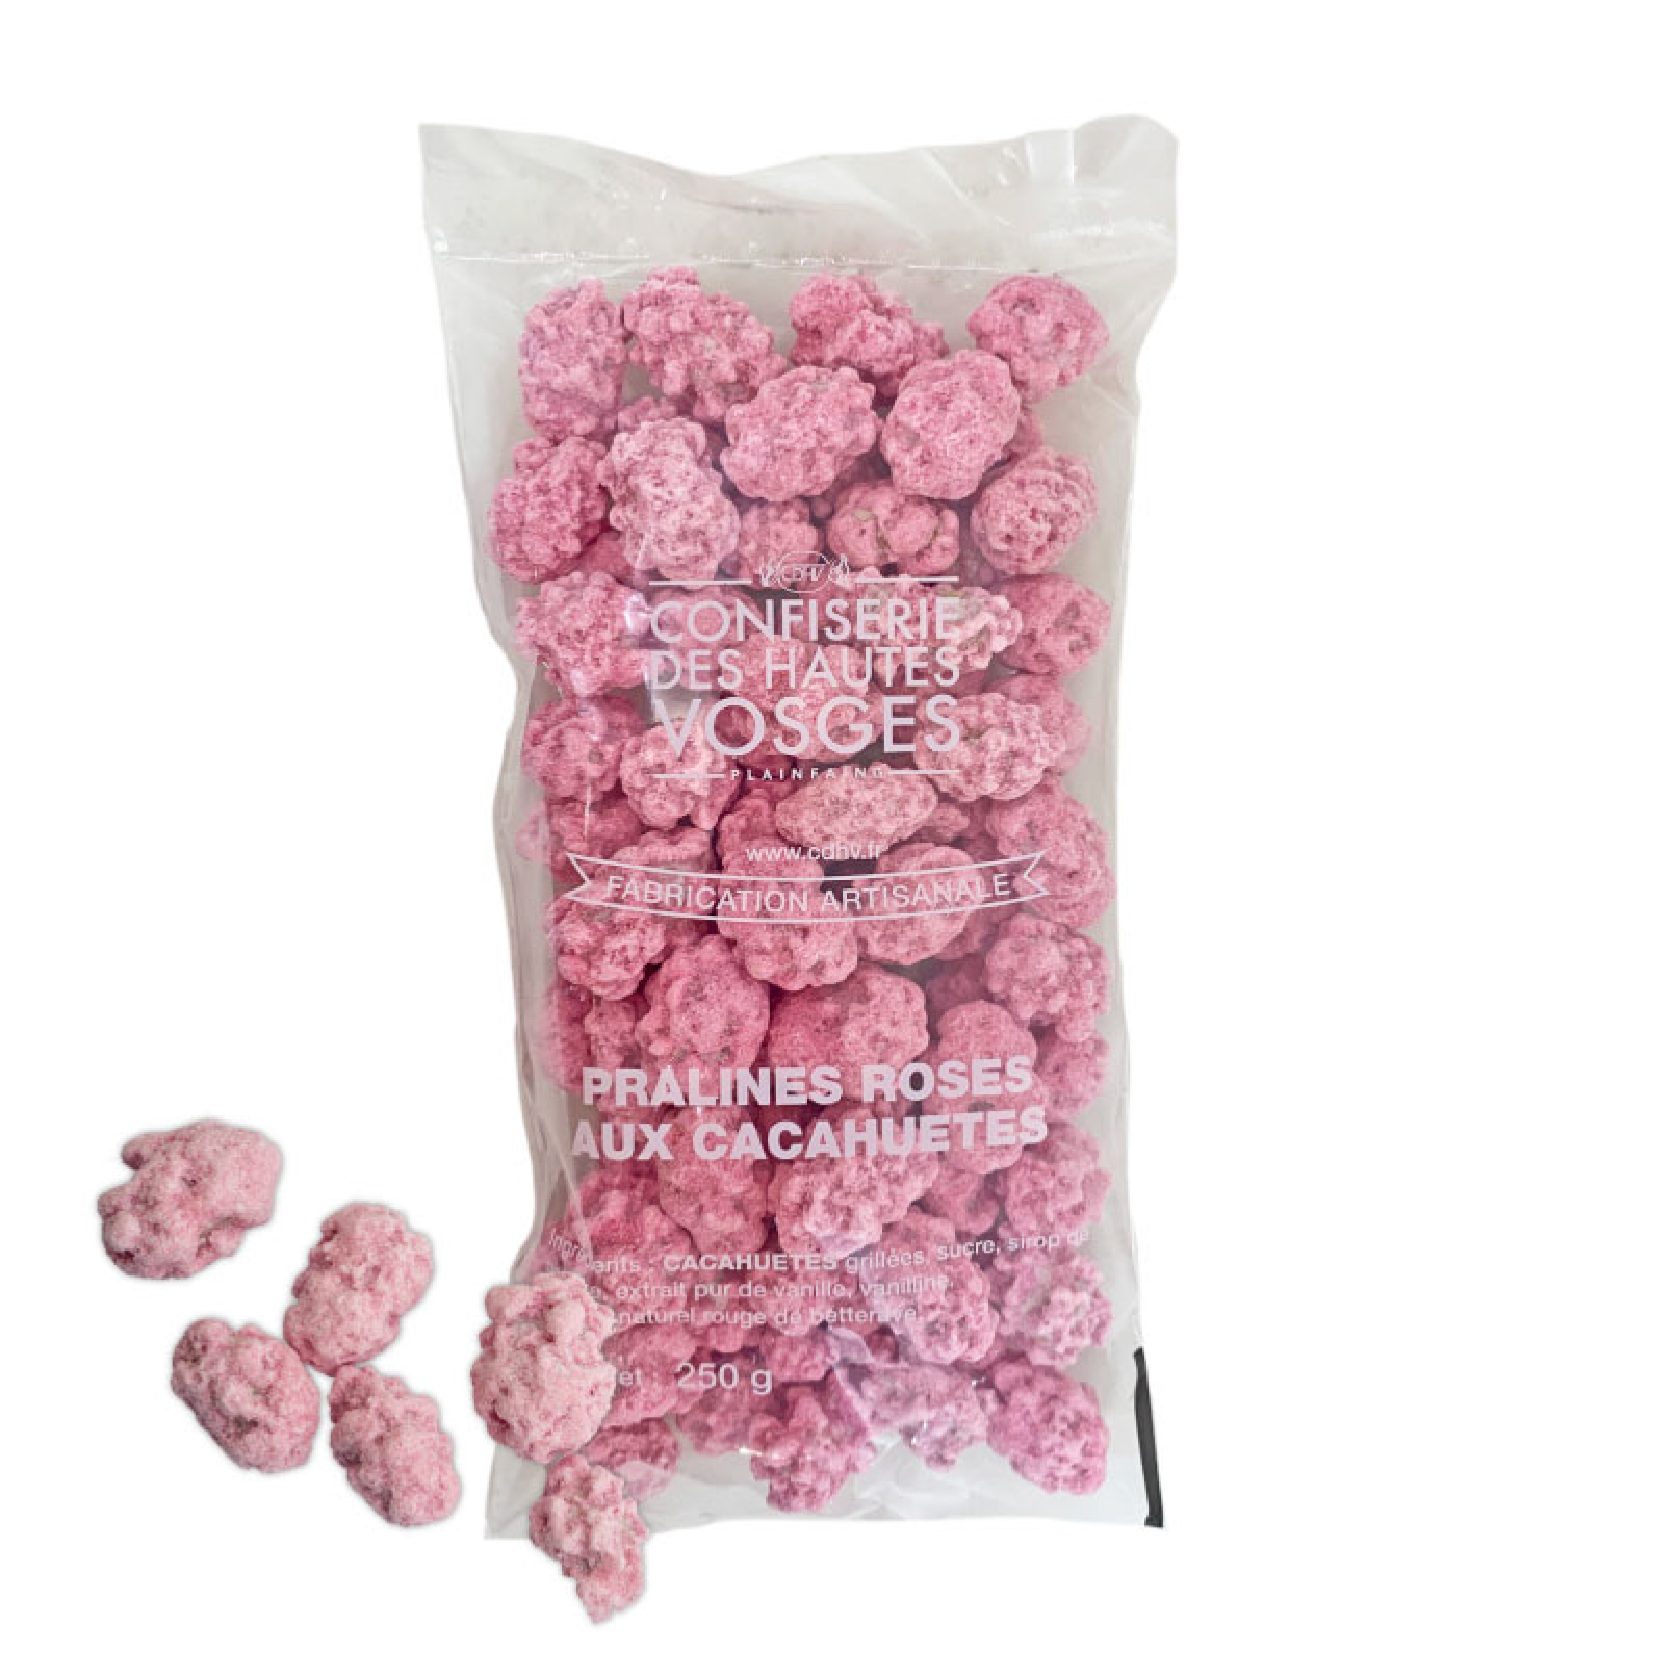 Pralines roses aux cacahutes 250 g